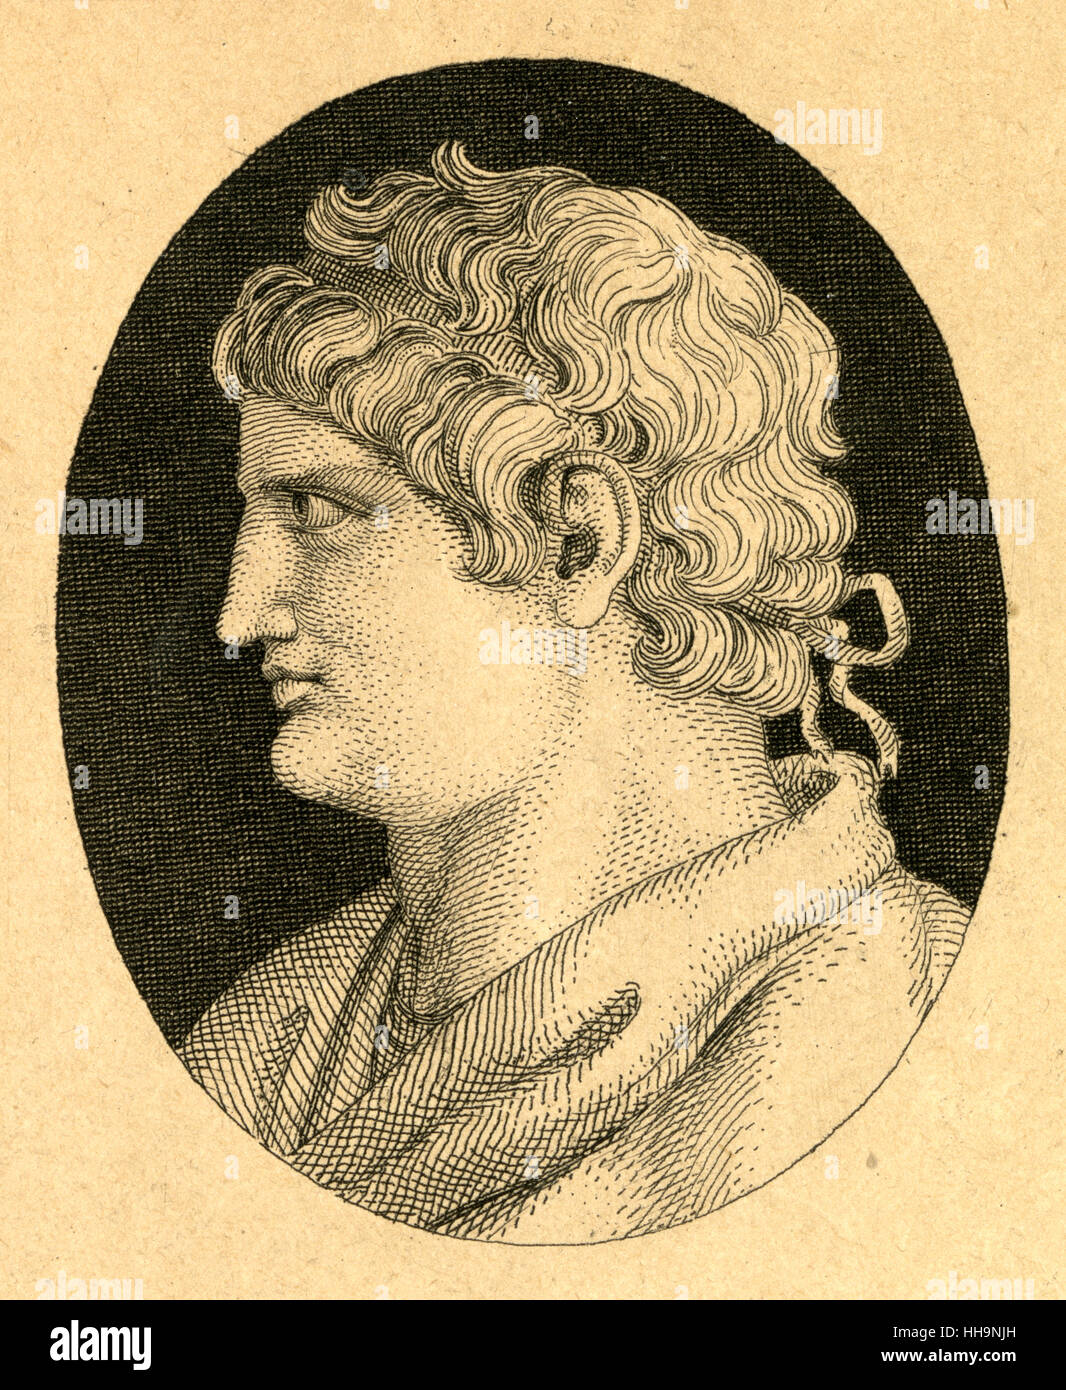 Antique c1840 engraving, Seleucus I Nicator. Seleucus I Nicator (c. 358 BC-281 BC) was one of the Diadochi. Having previously served as an infantry general under Alexander the Great, he eventually assumed the title of basileus and established the Seleucid Empire over much of the territory in the Near East which Alexander had conquered. SOURCE: ORIGINAL ENGRAVING. Stock Photo